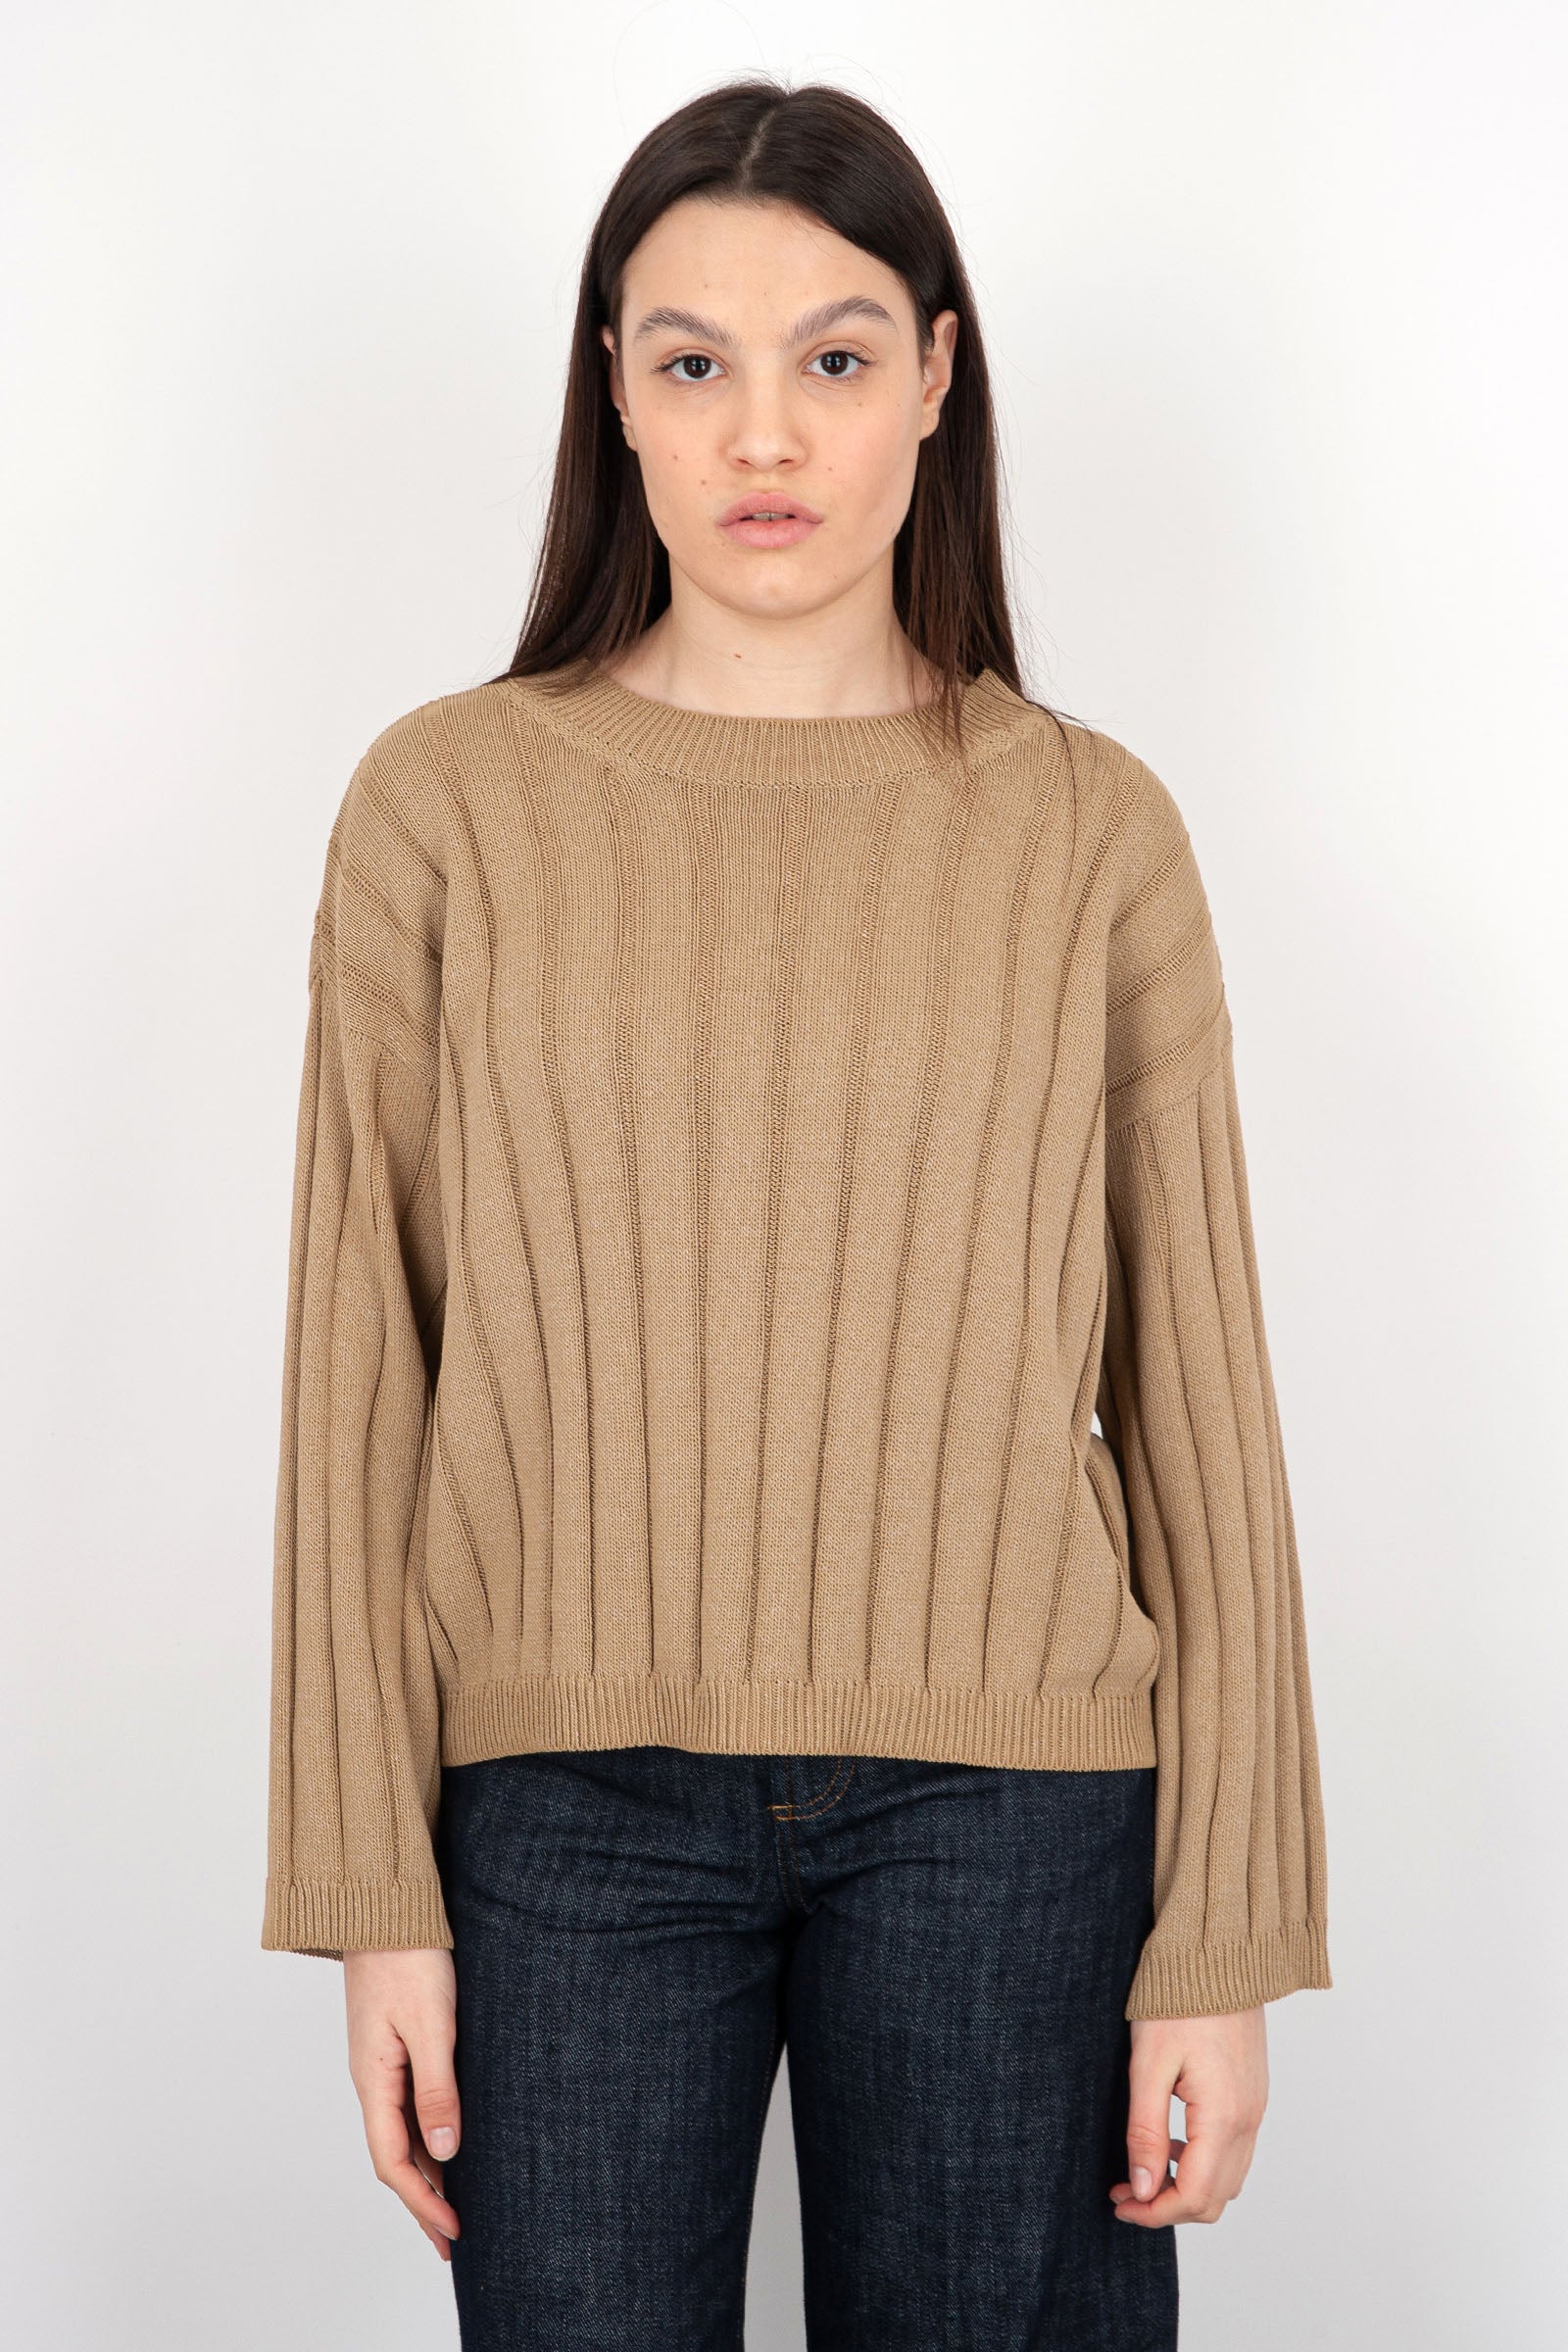 Grifoni Ribbed Sand Knit in Cotton/Polyamide - 1